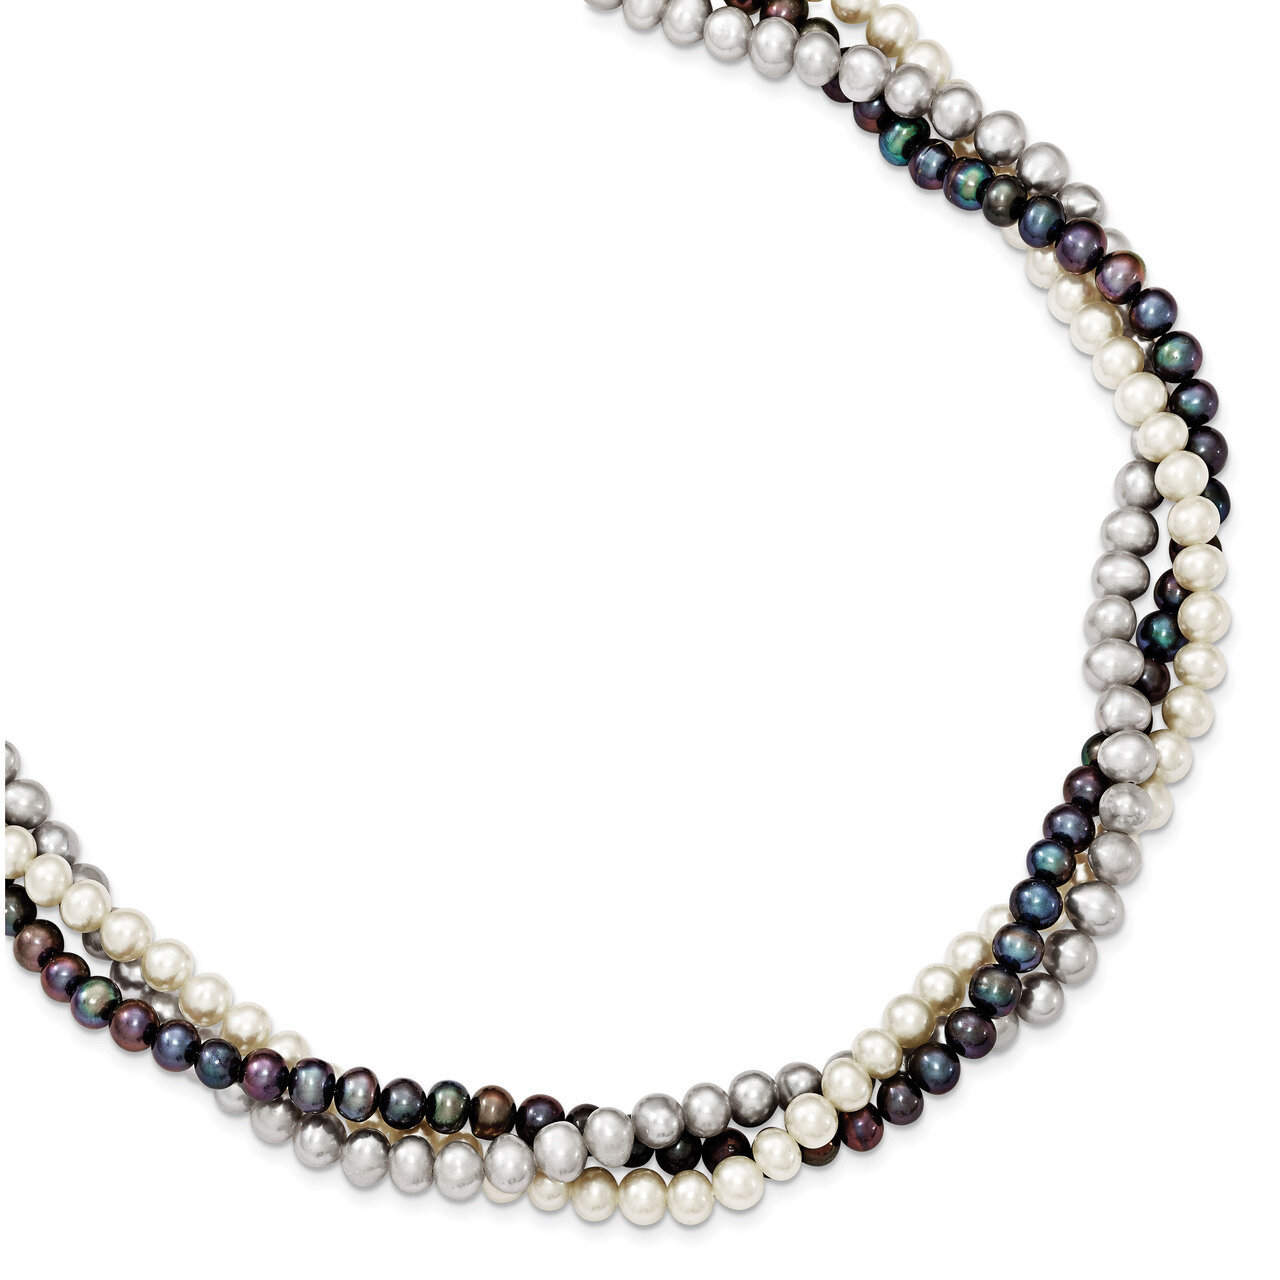 5-6mm Cultured Semi Round Pearl with 2 Inch Extender Necklace Sterling Silver QH4789-17